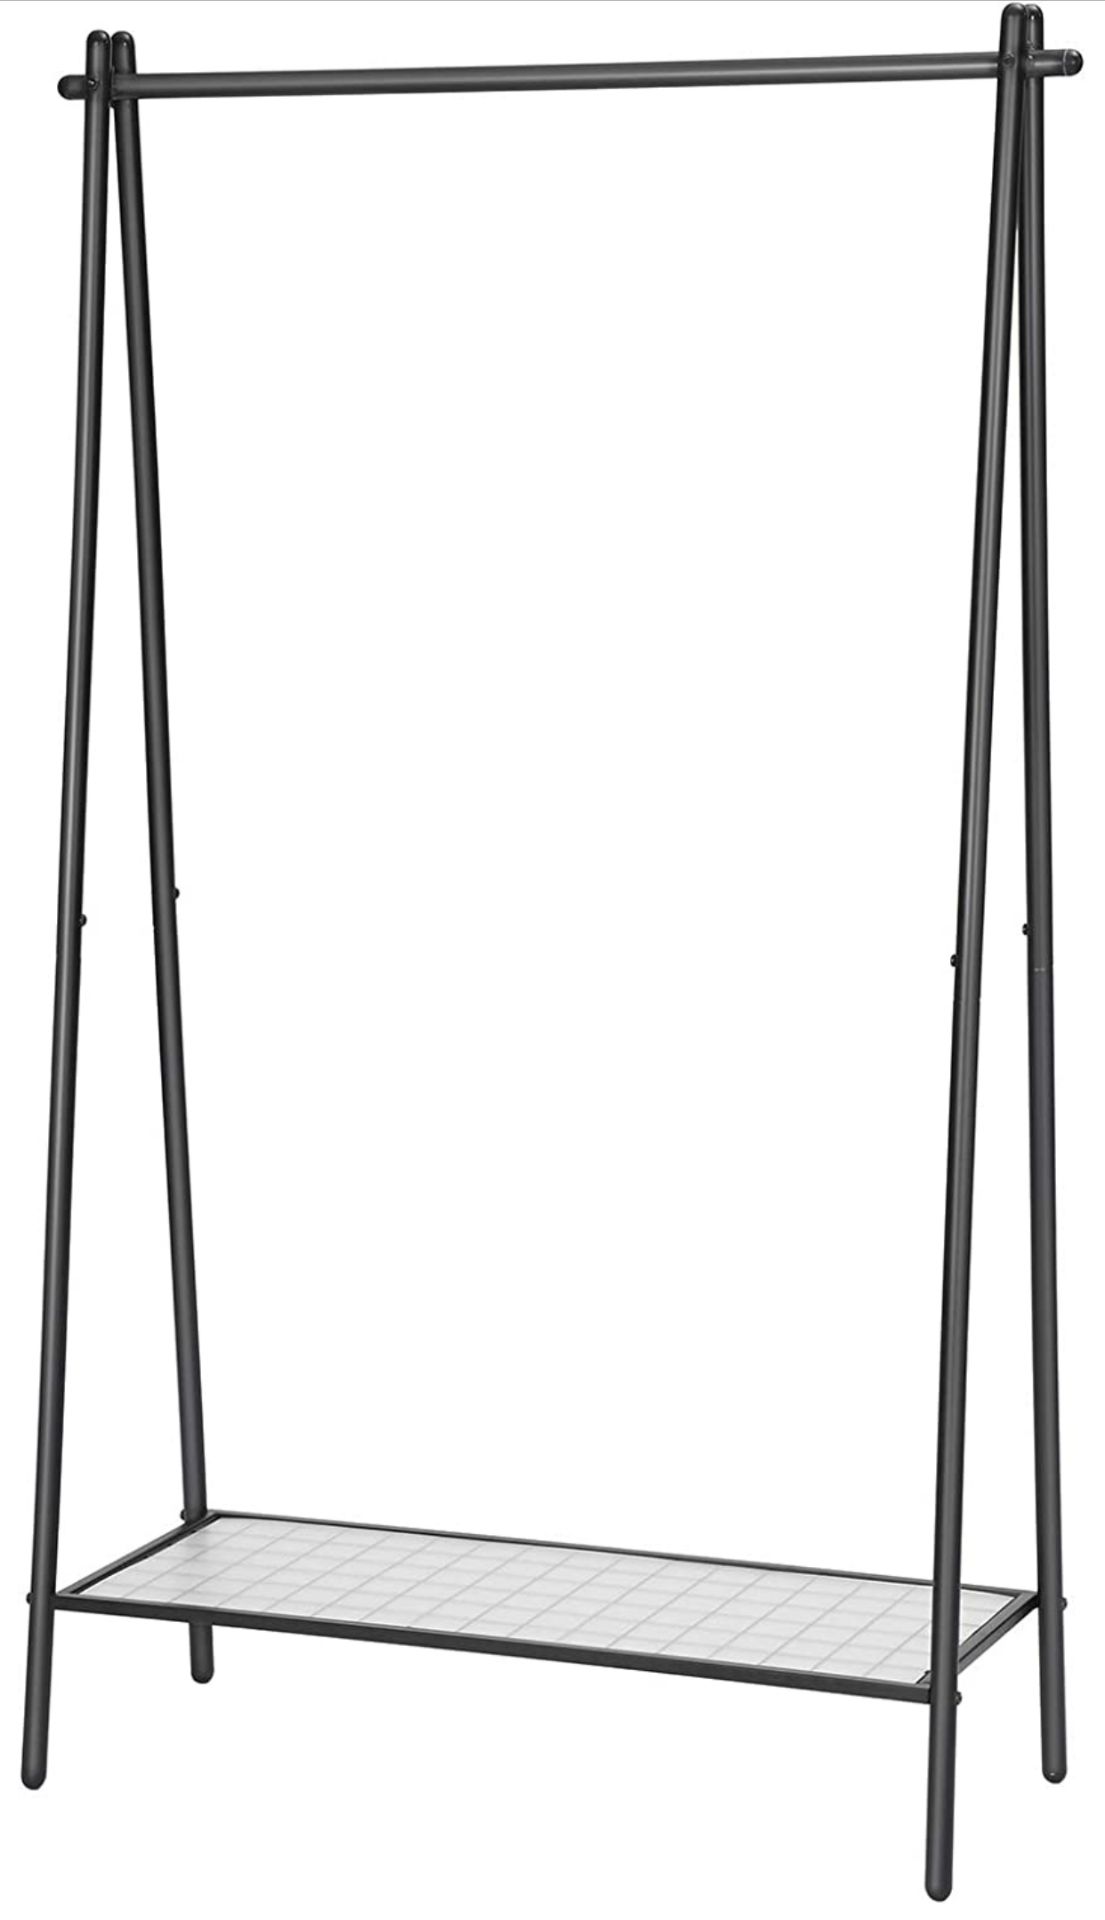 Songmics Clothes Rack with Steel Structure Garment Rack RRP £35.99